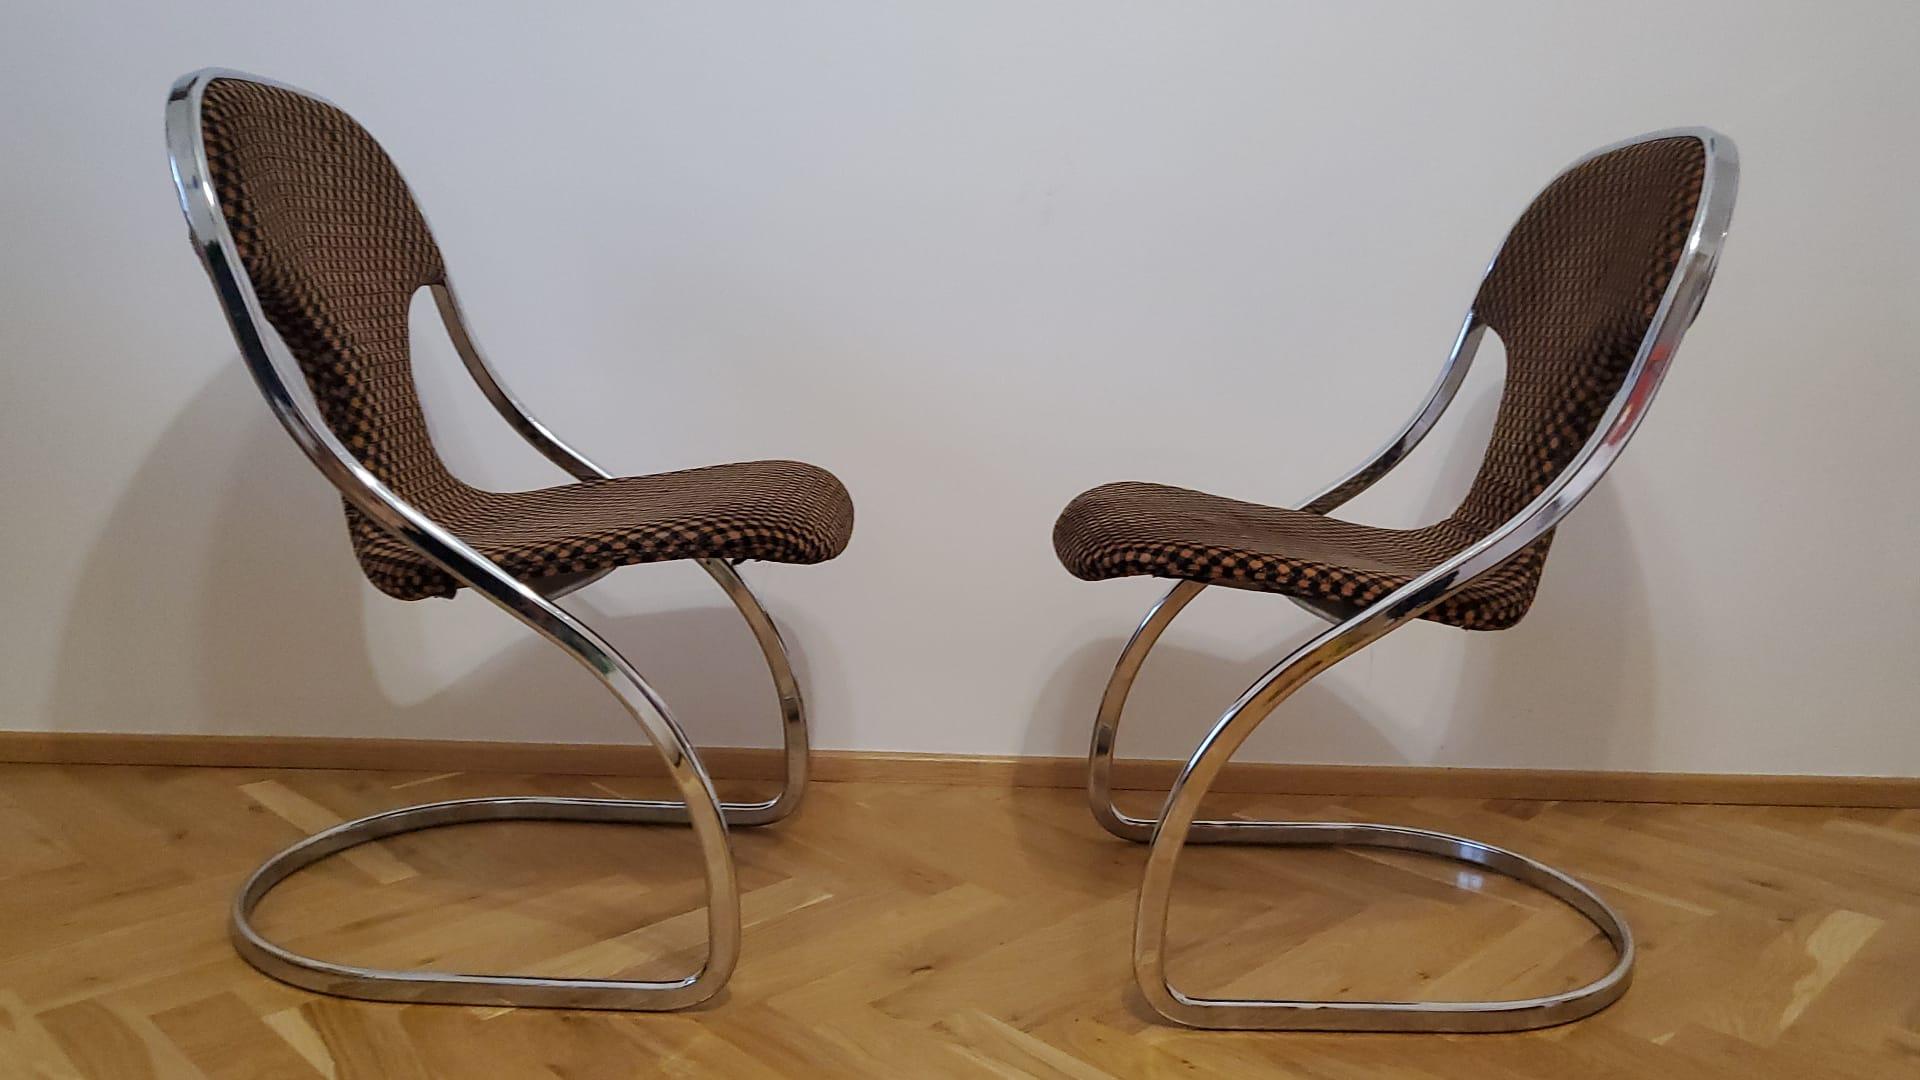 Fabric Pair of Midcentury Rare Design Chairs, Italy, 1970s For Sale